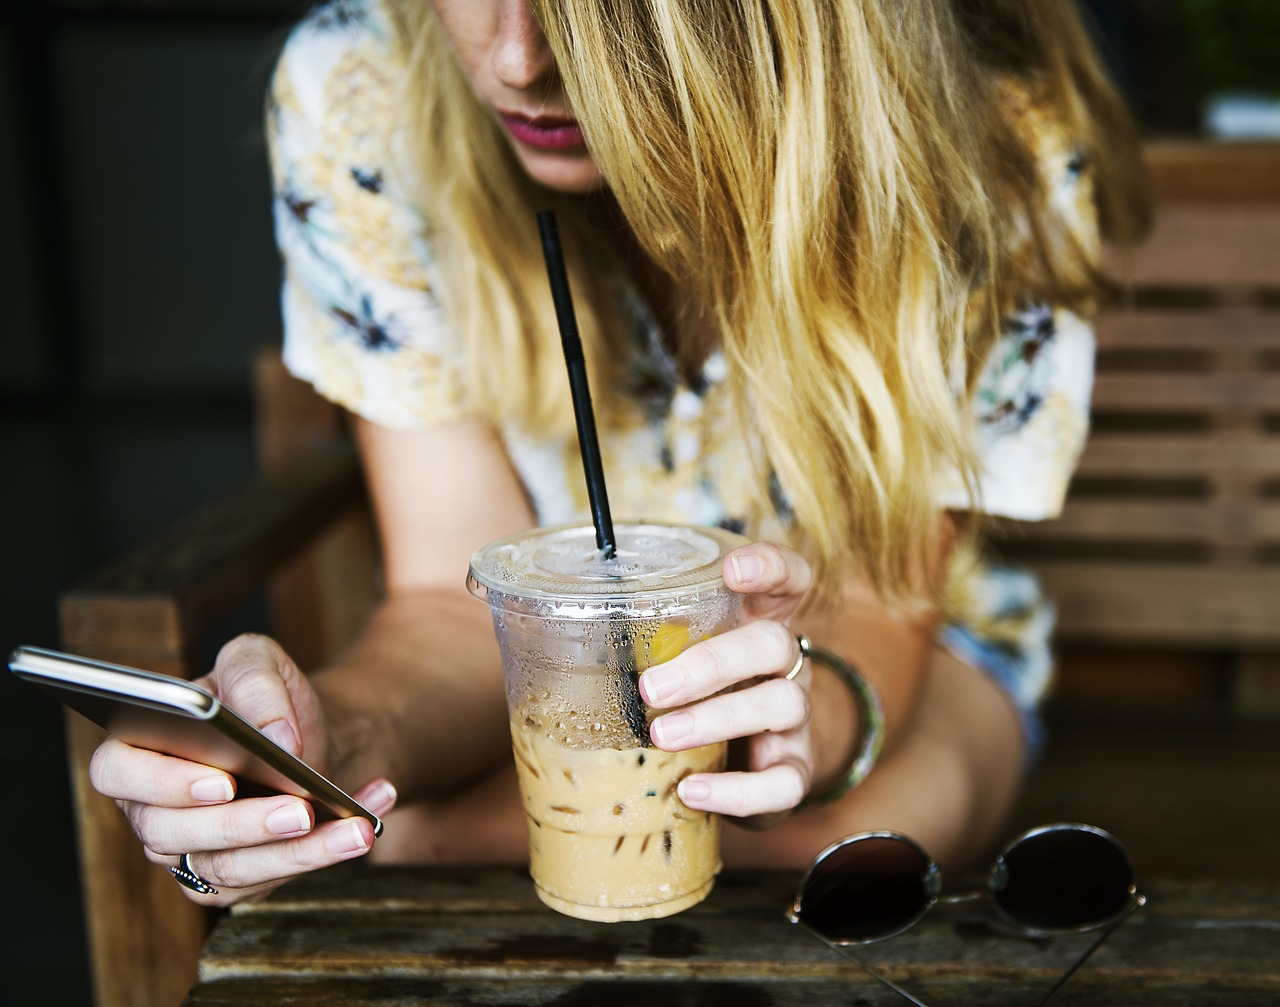 image: girl checking phone and drinking coffee